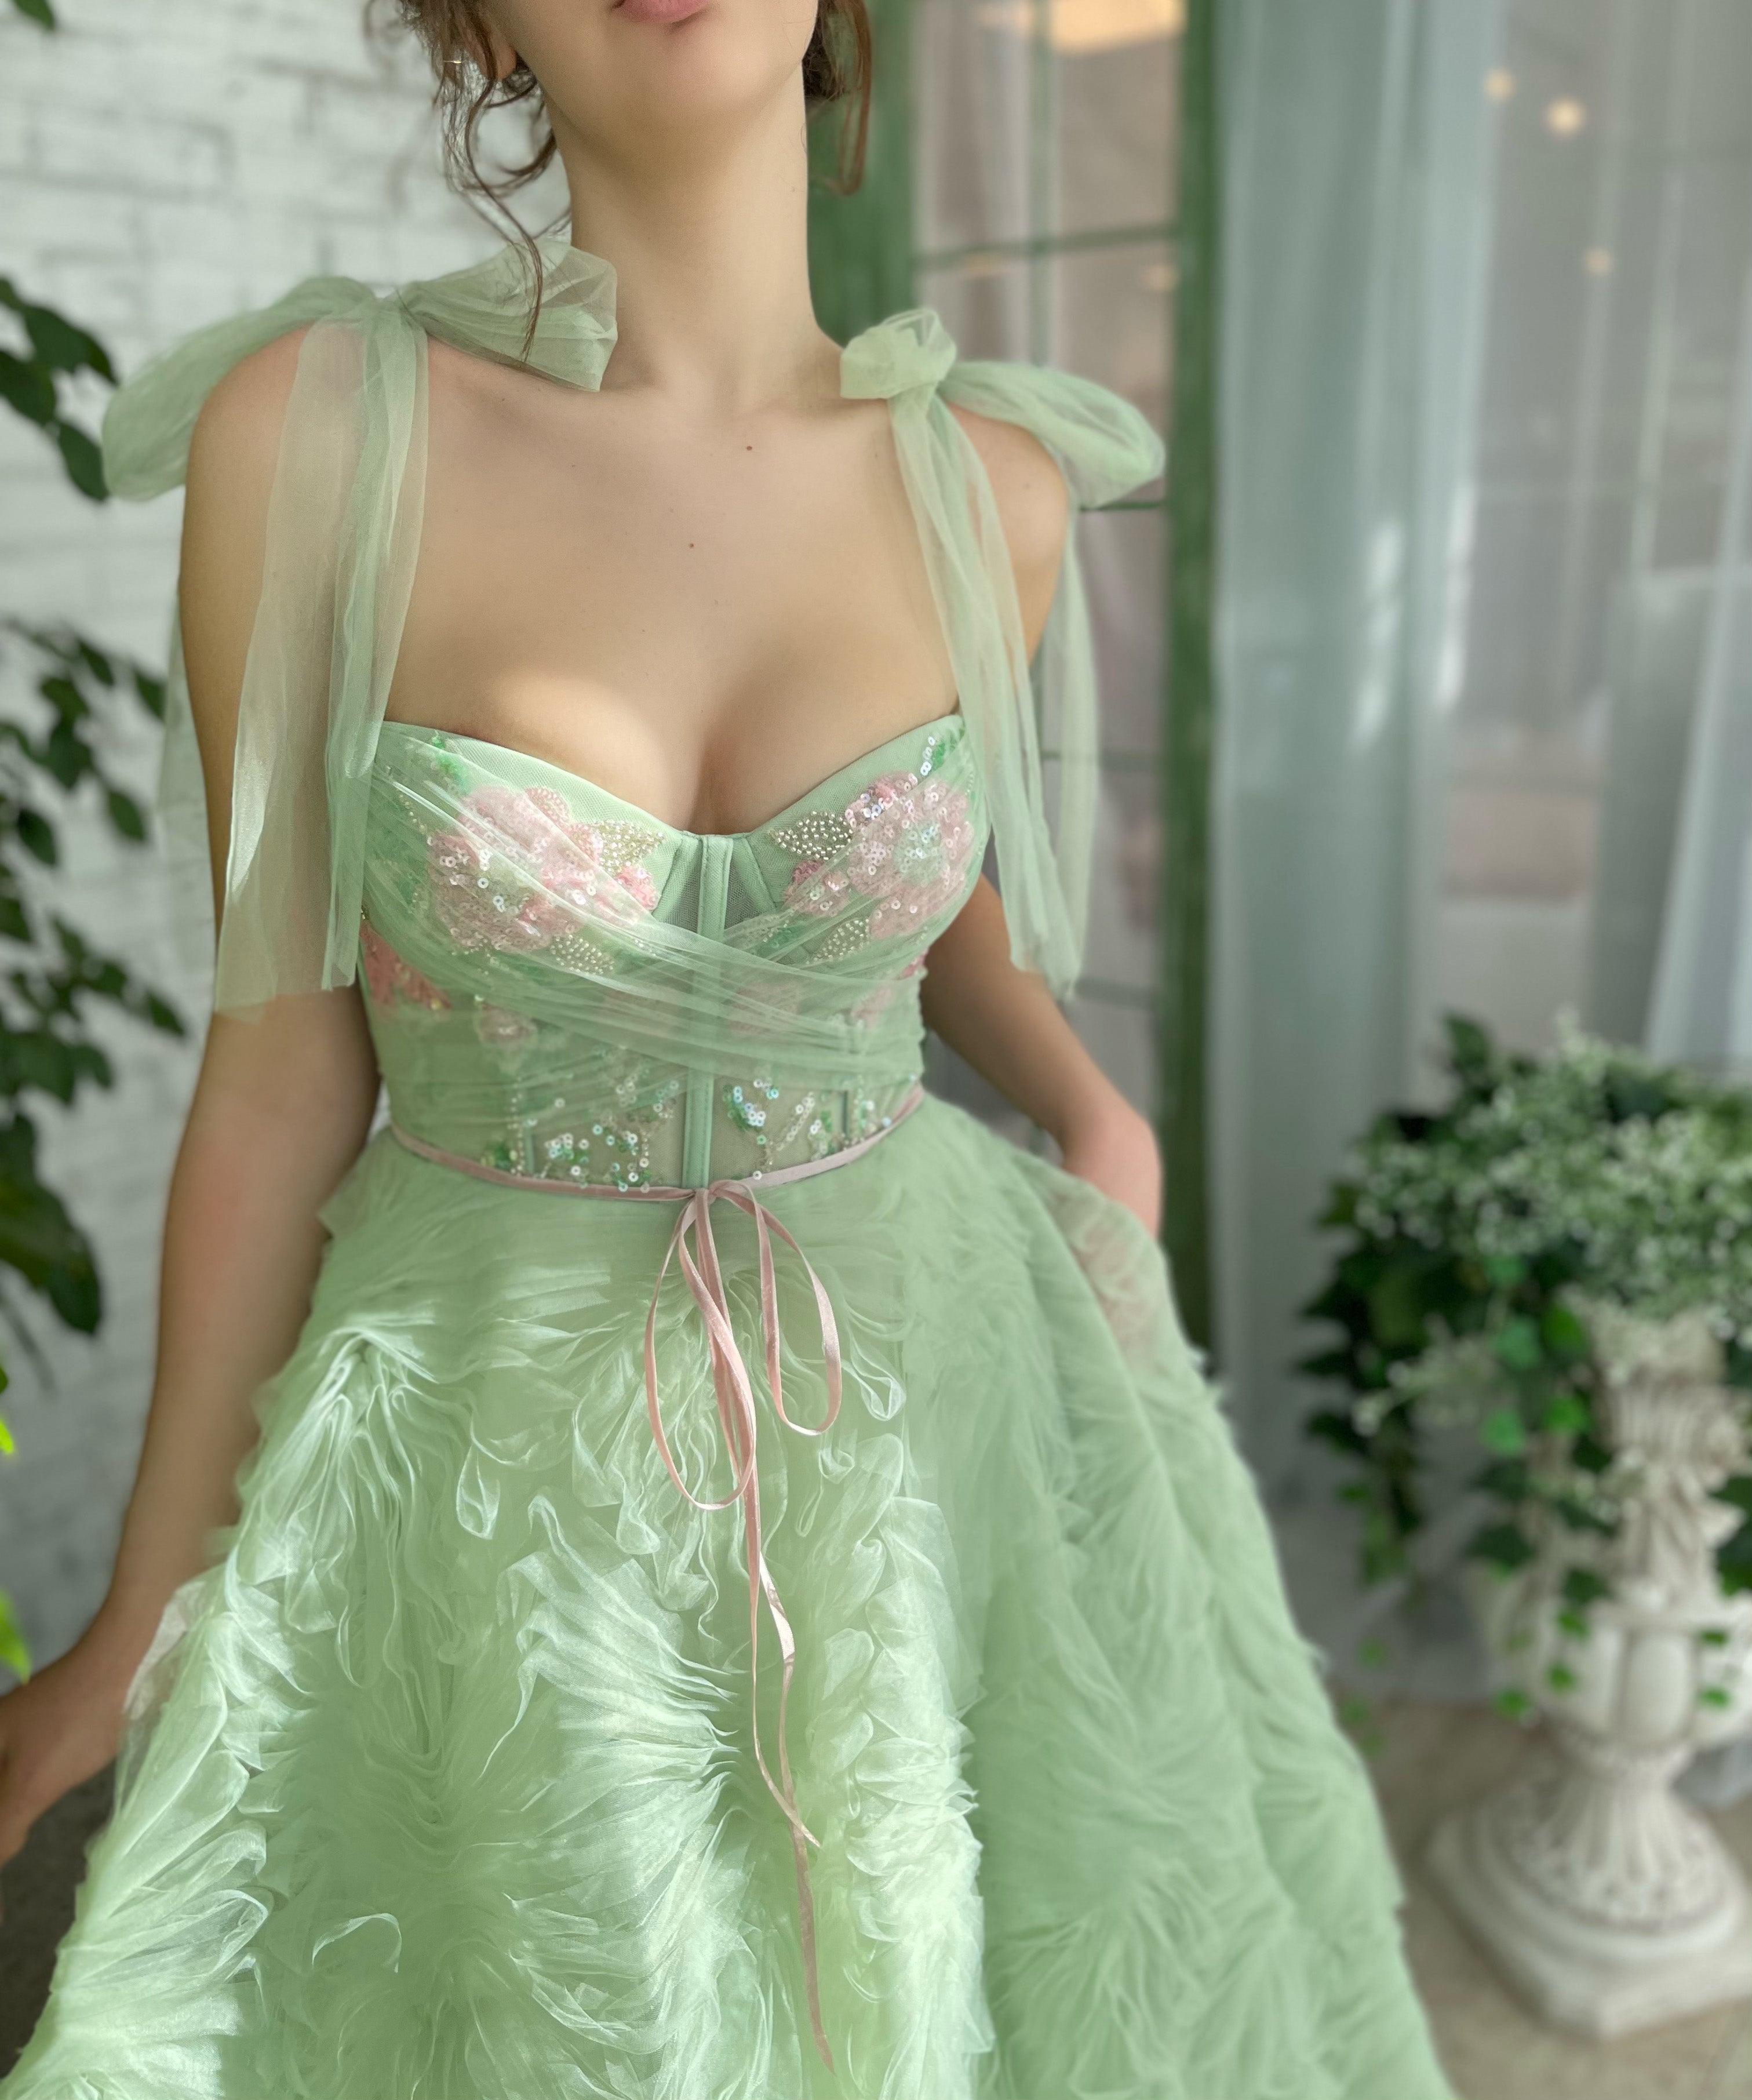 Green A-Line dress with bow straps and embroidery